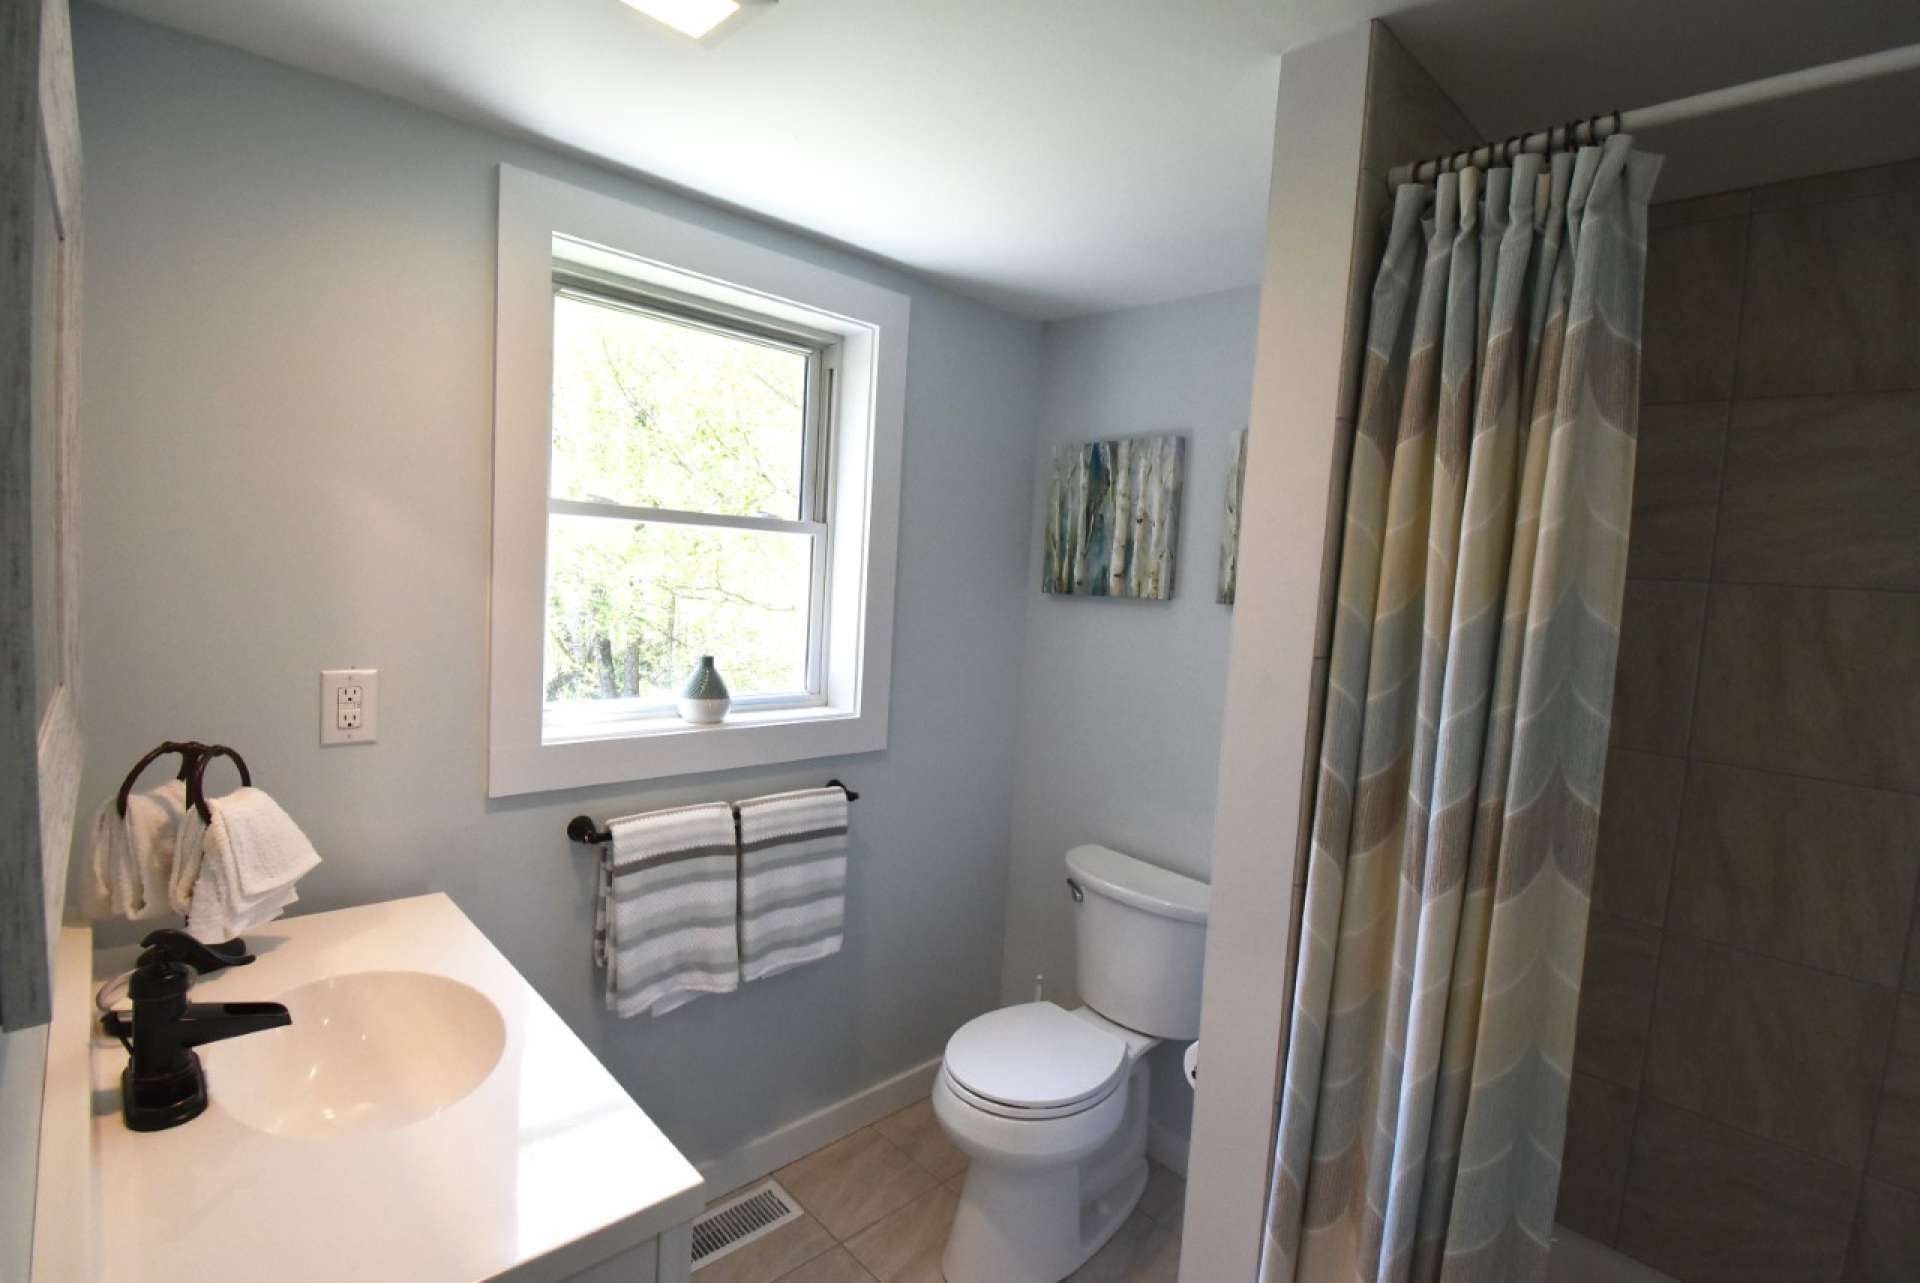 The bathroom is also charming with ceramic tile floor that extends into the tub/shower area.